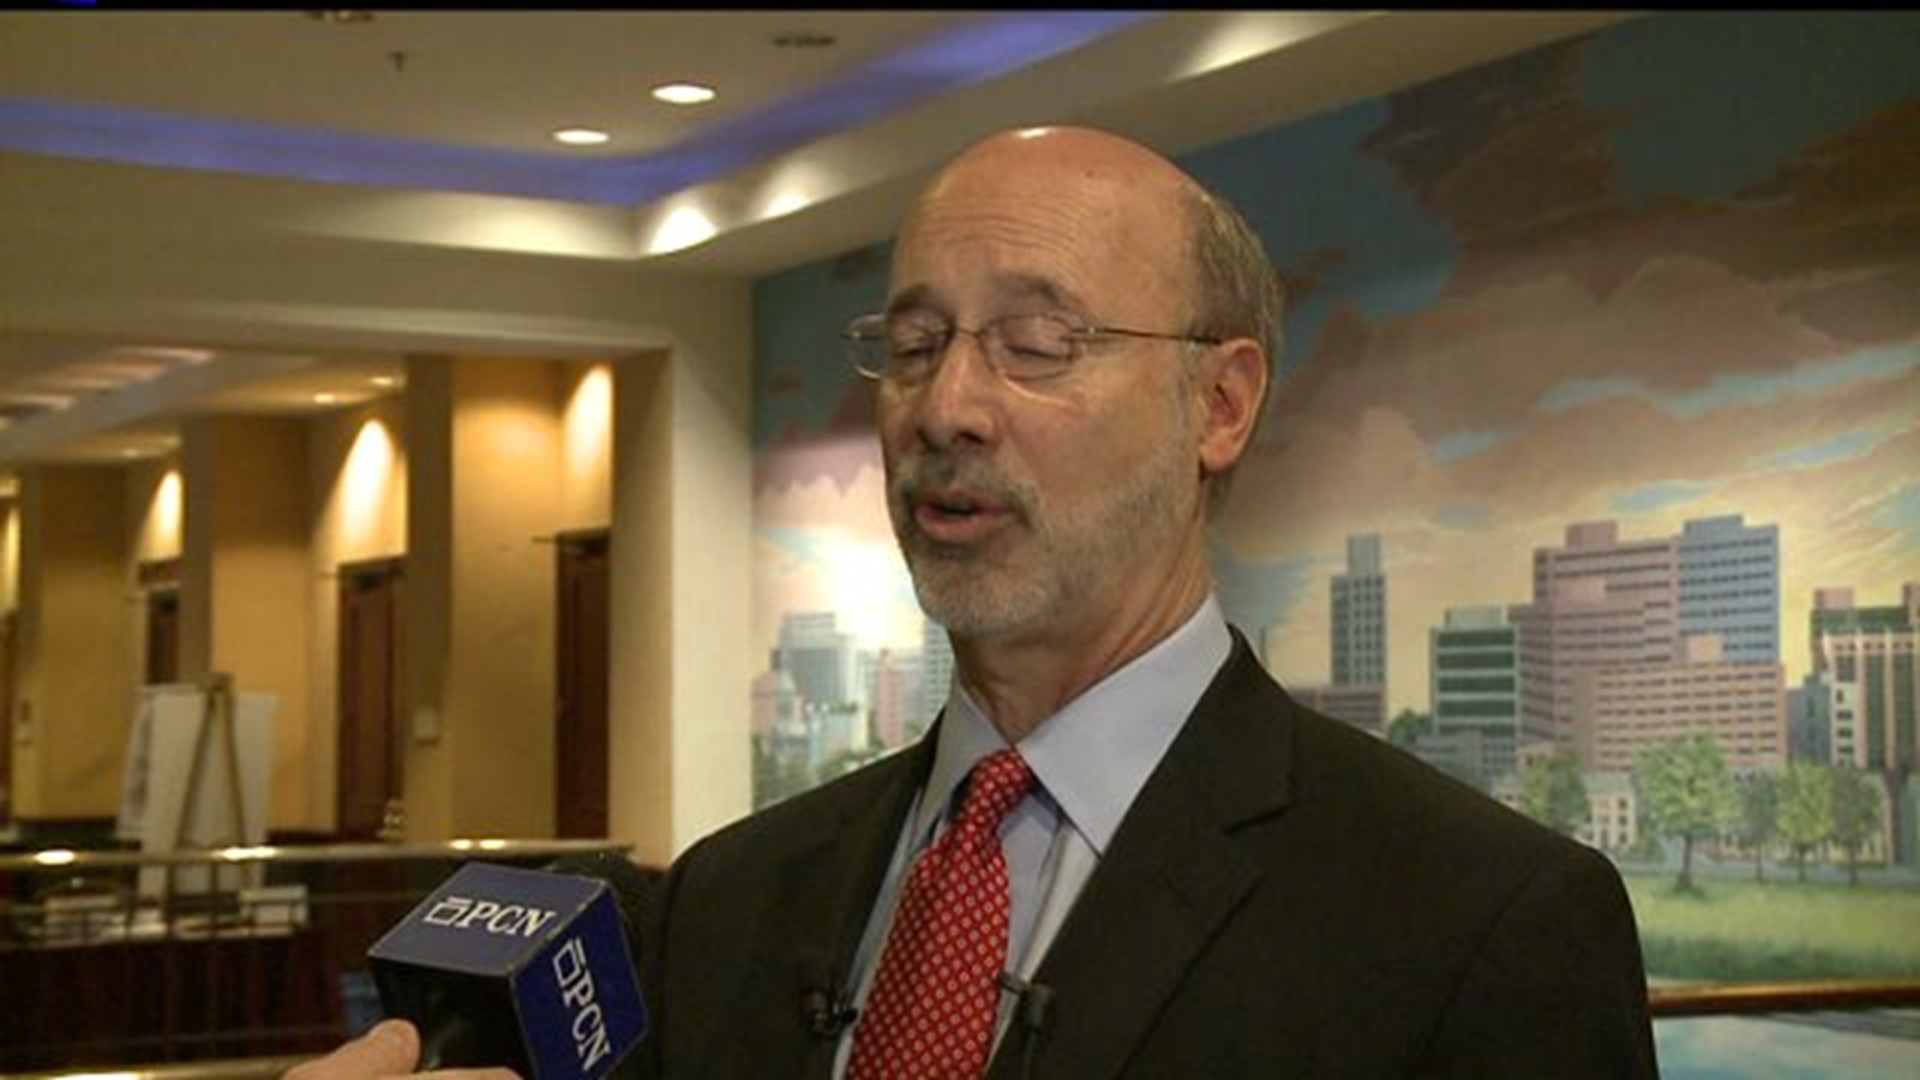 Gov. Wolf moving forward with Medicaid expansion